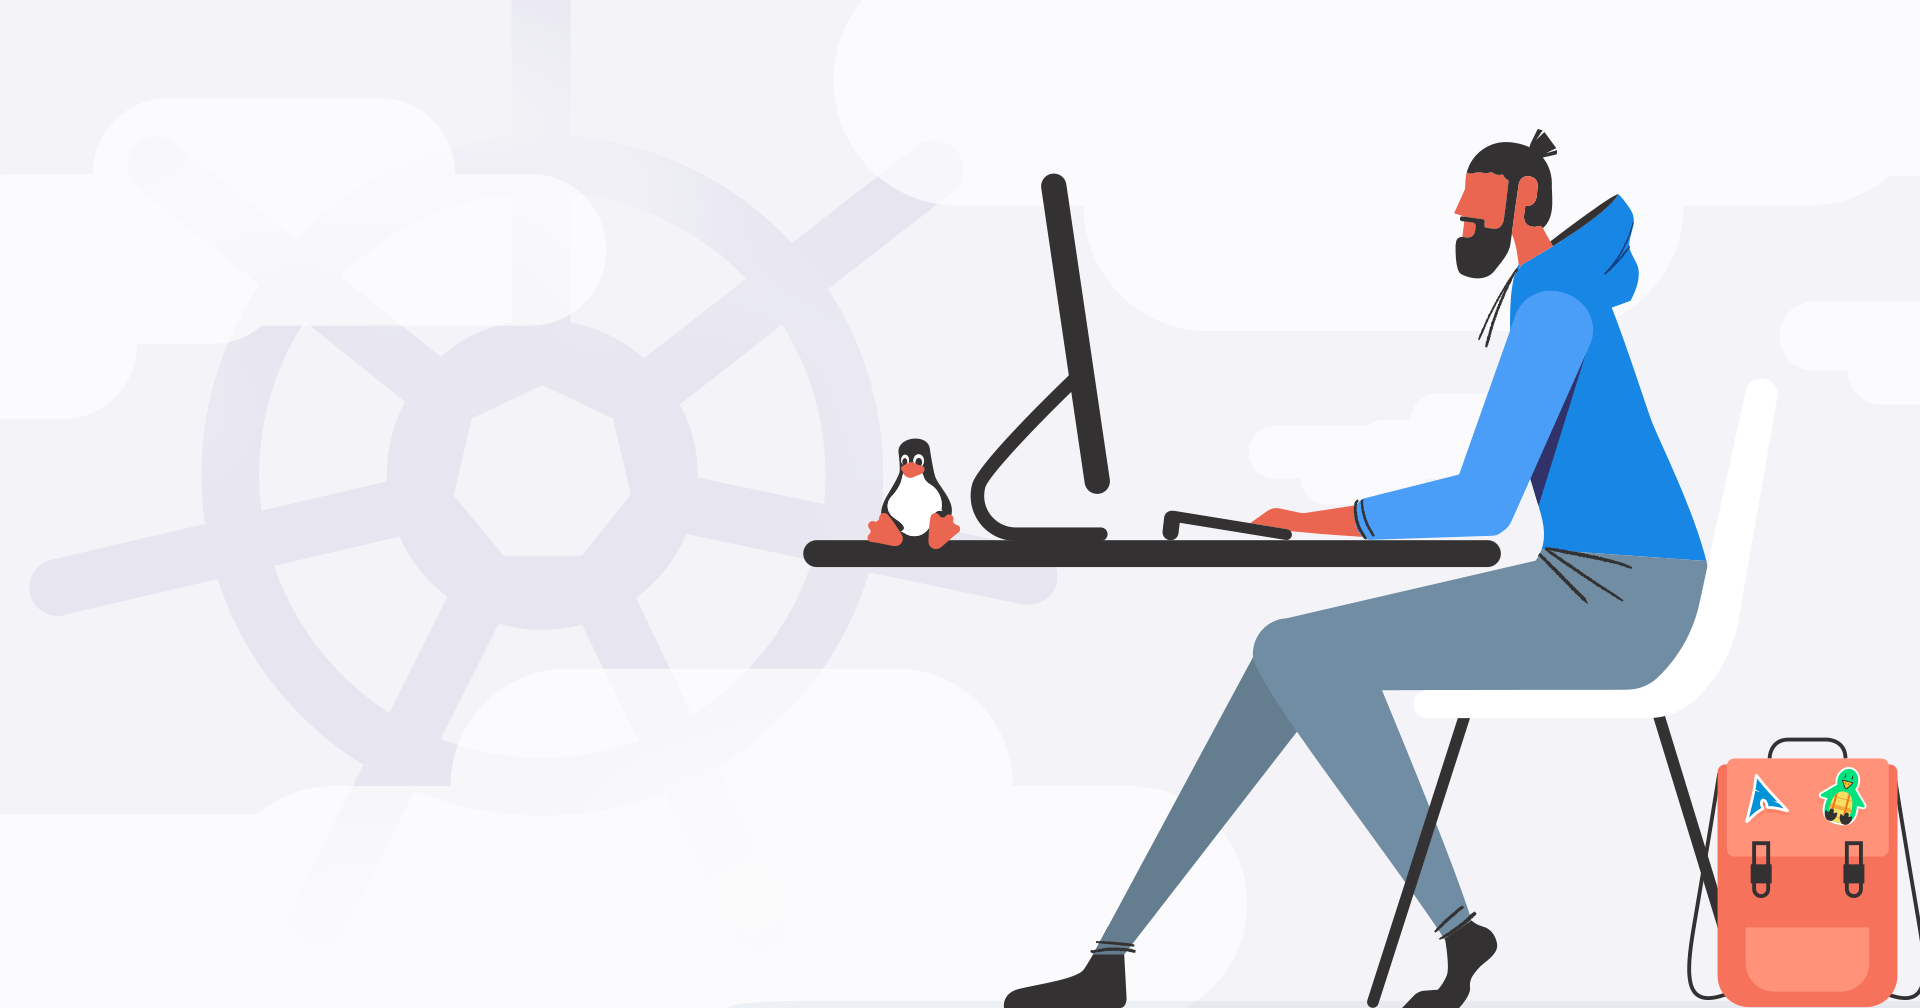 A cartoon graphic of a person at a computer with the Kubernetes logo behind him